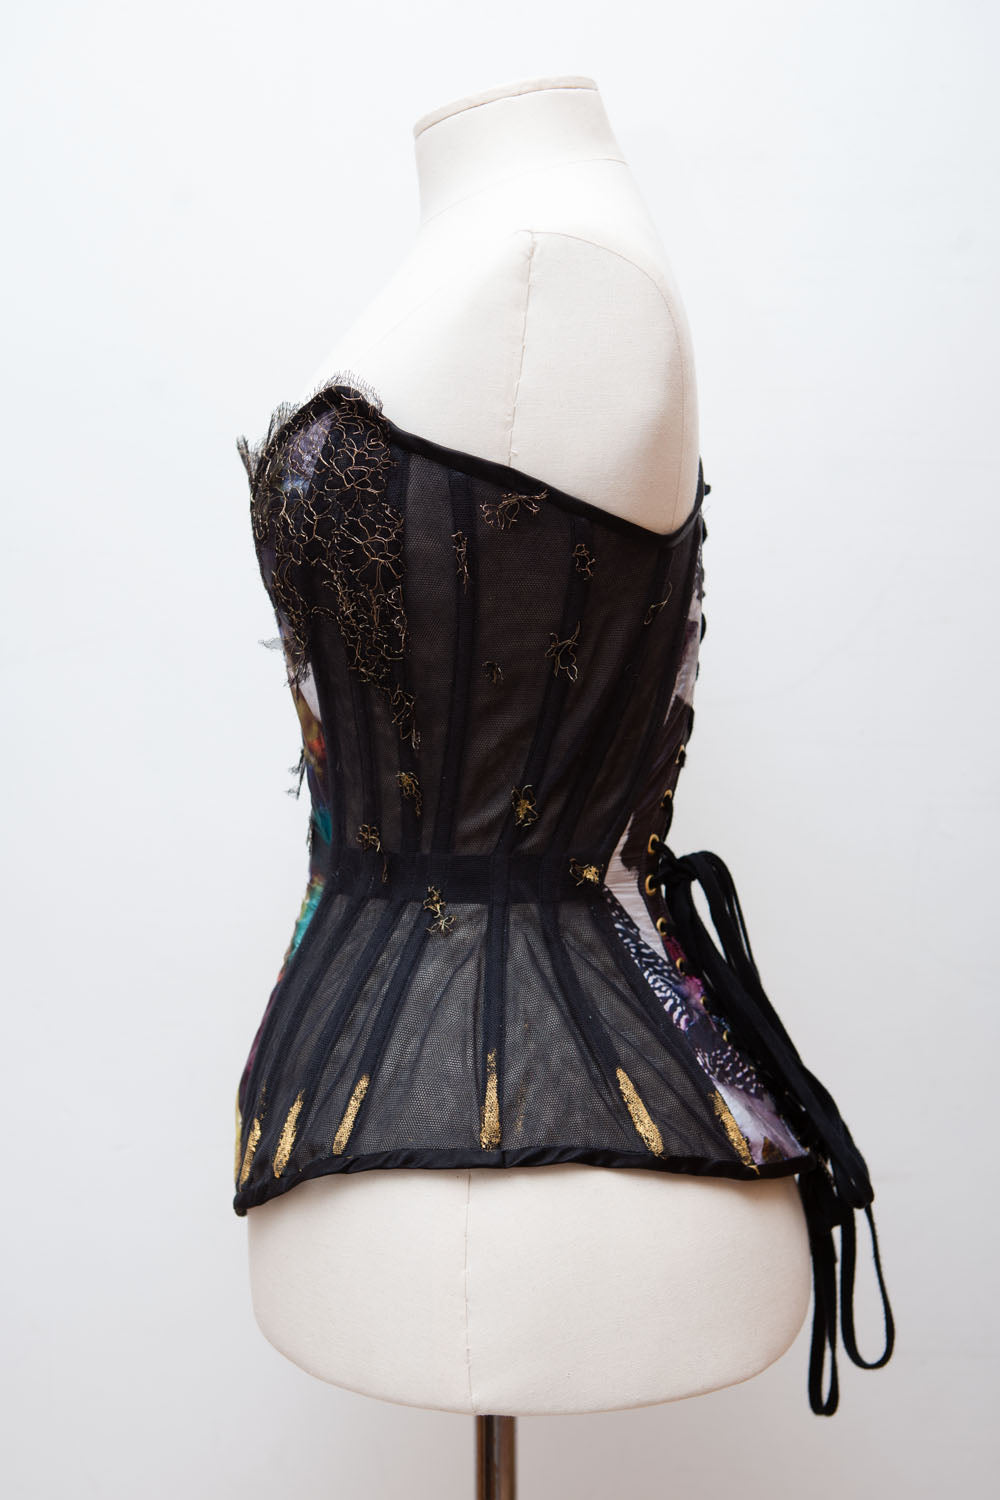 Shop Corset with a fancy pattern - Céline from Lily Was Here at Seezona